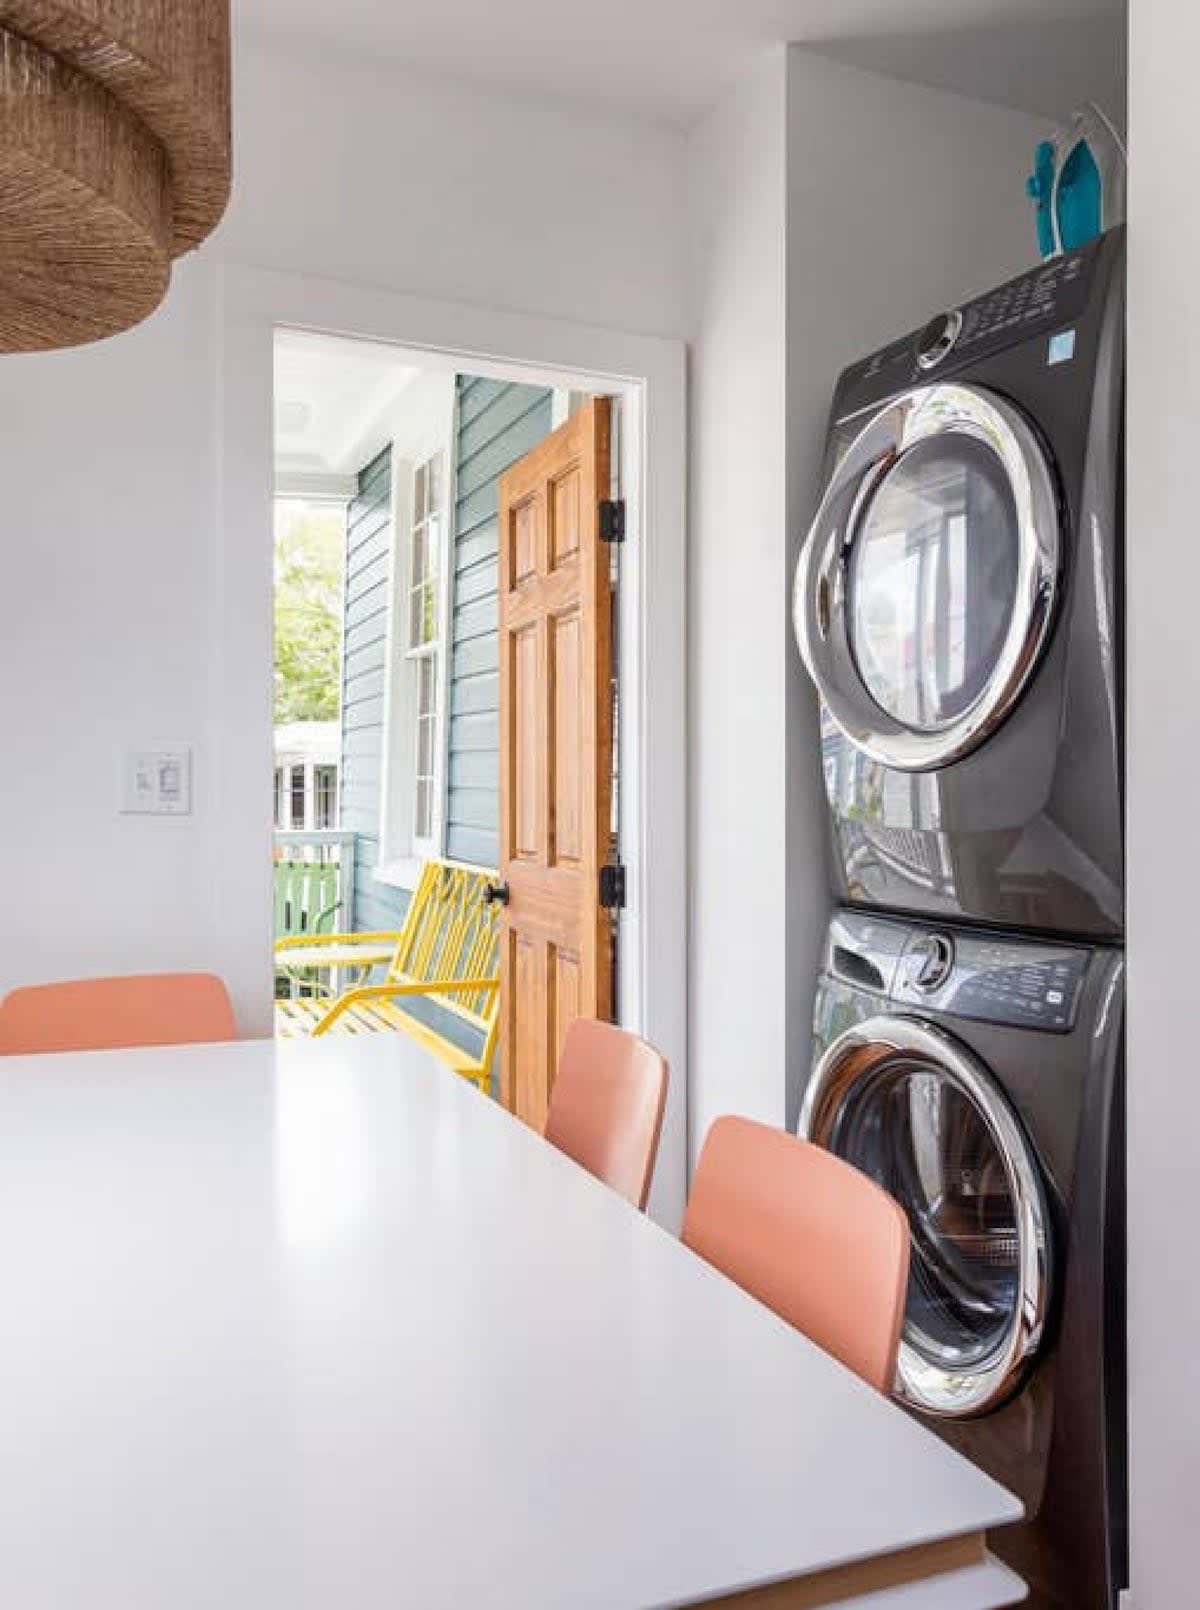 Each Unit has a high end washer and dryer with Steam Capabilities to get those wrinkles out!